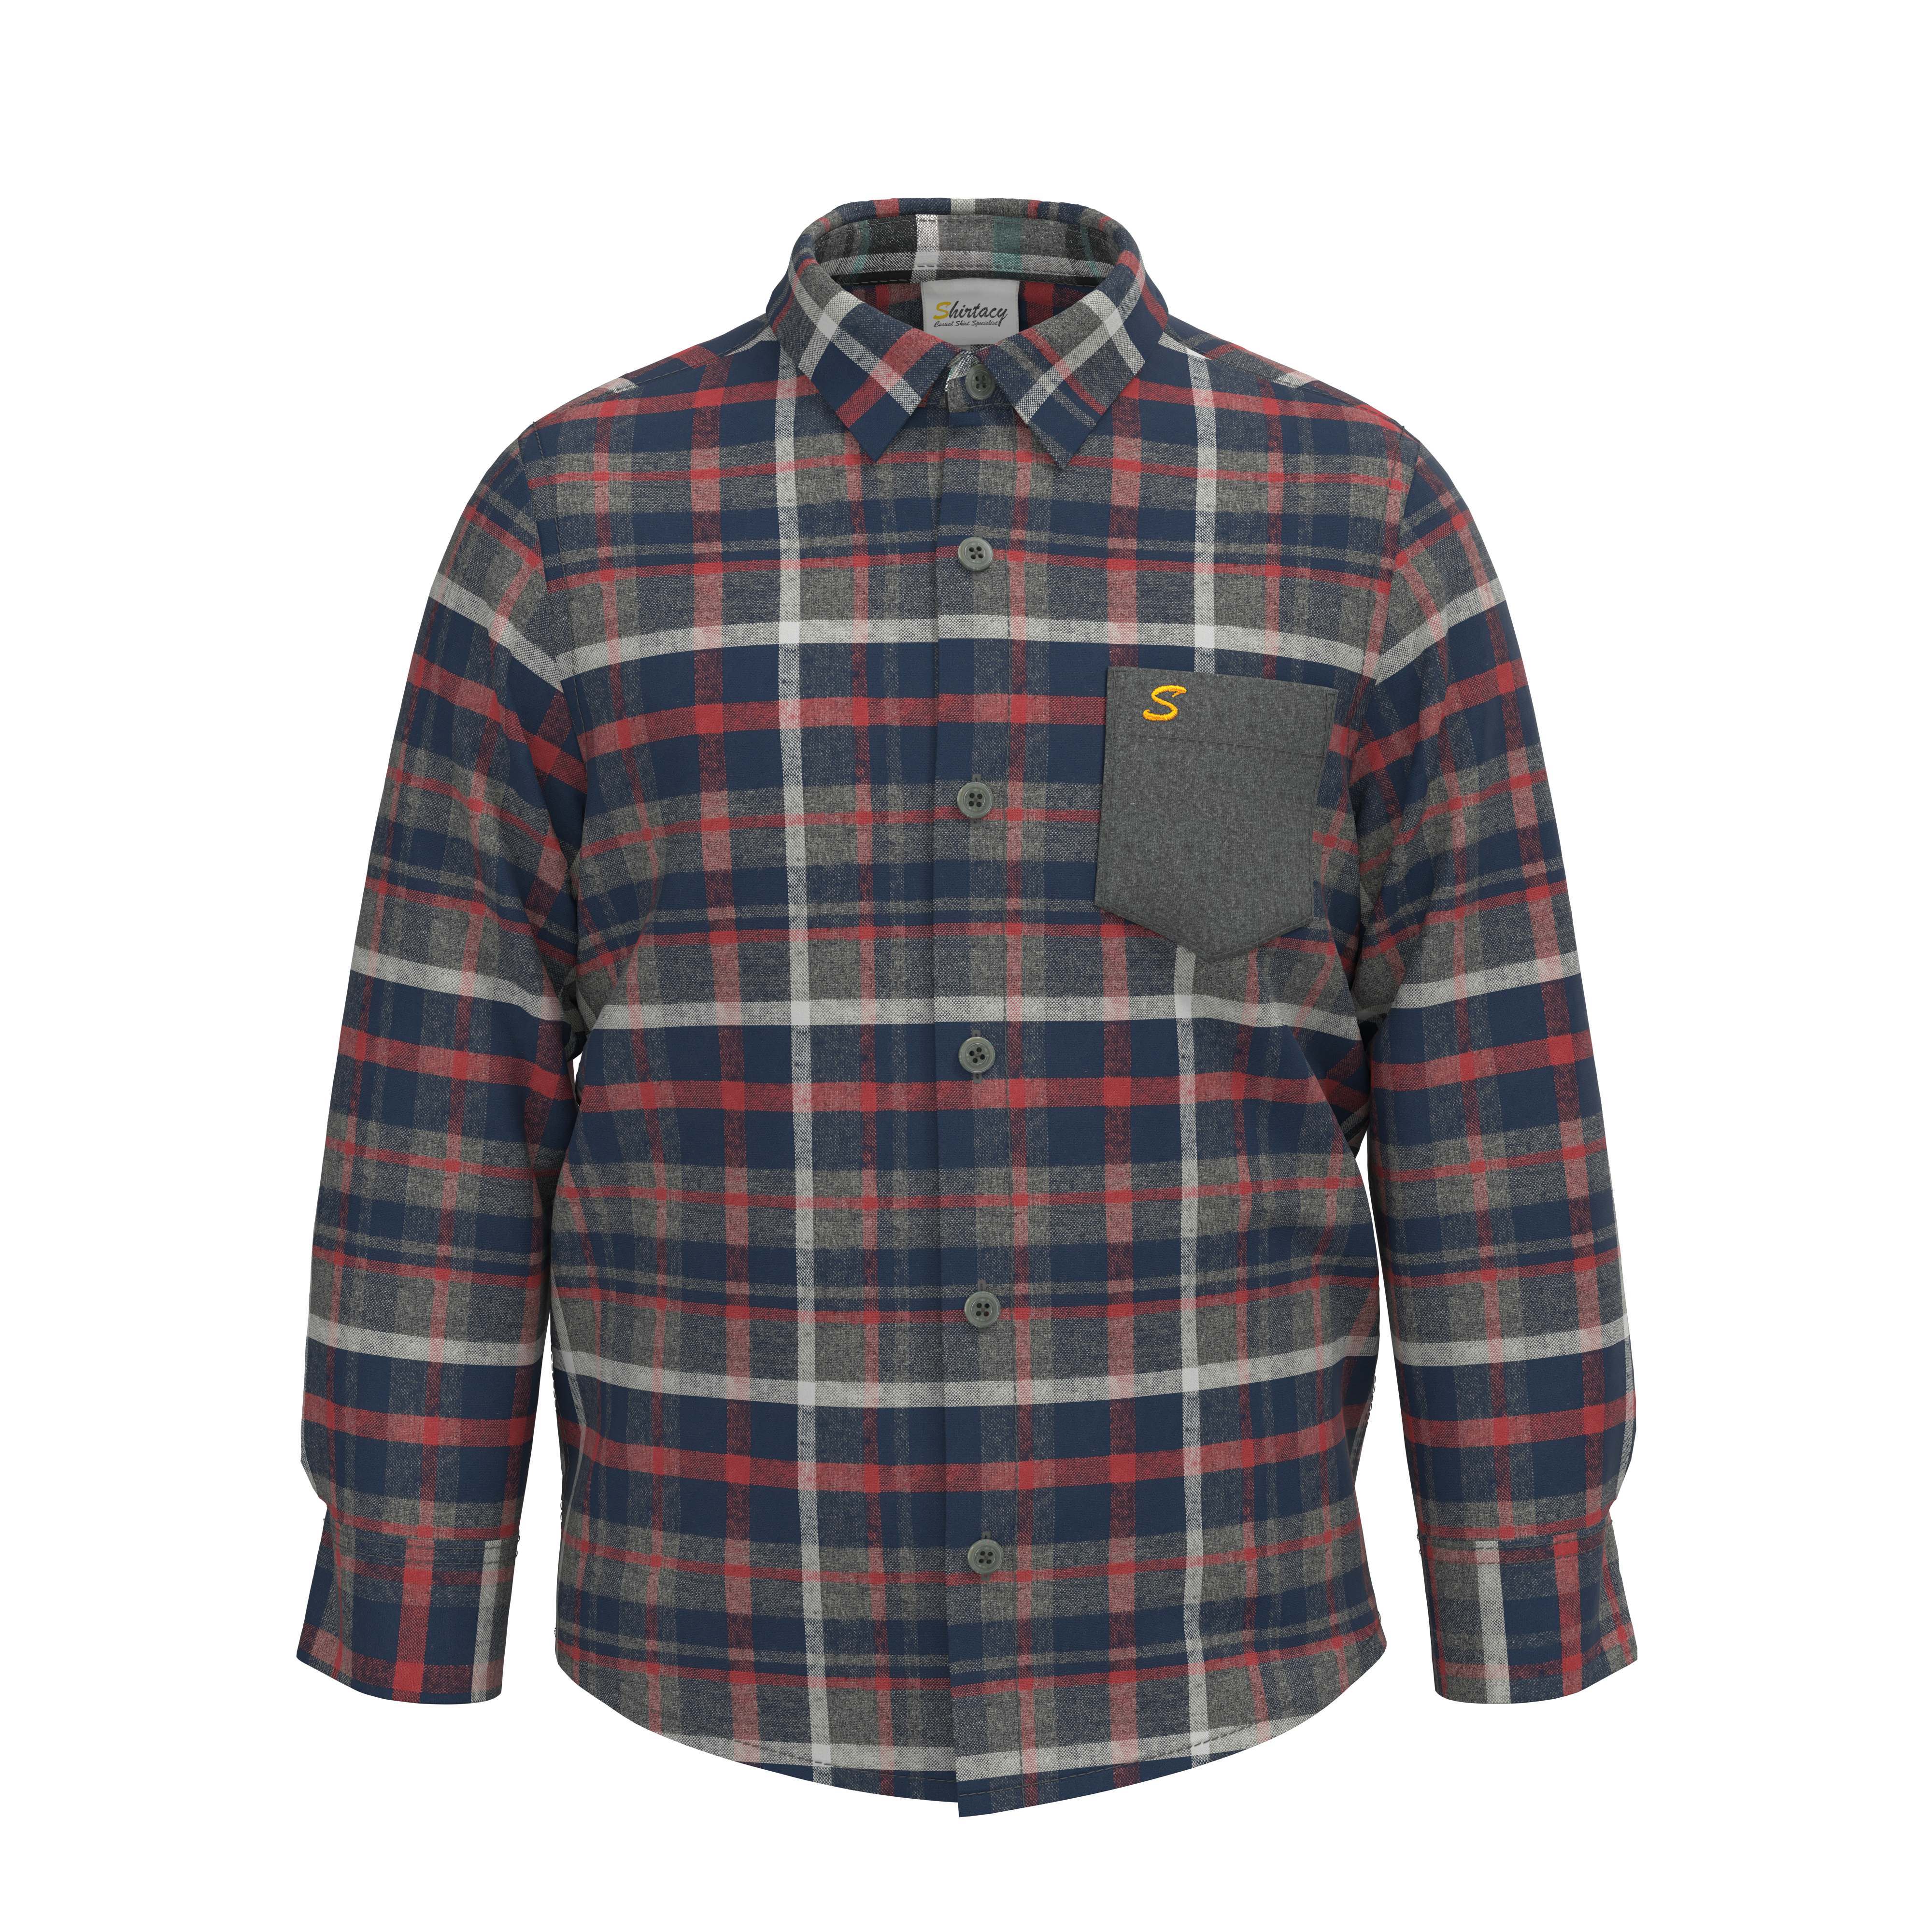 Wool-Blend Shirt with Contrast Pocket